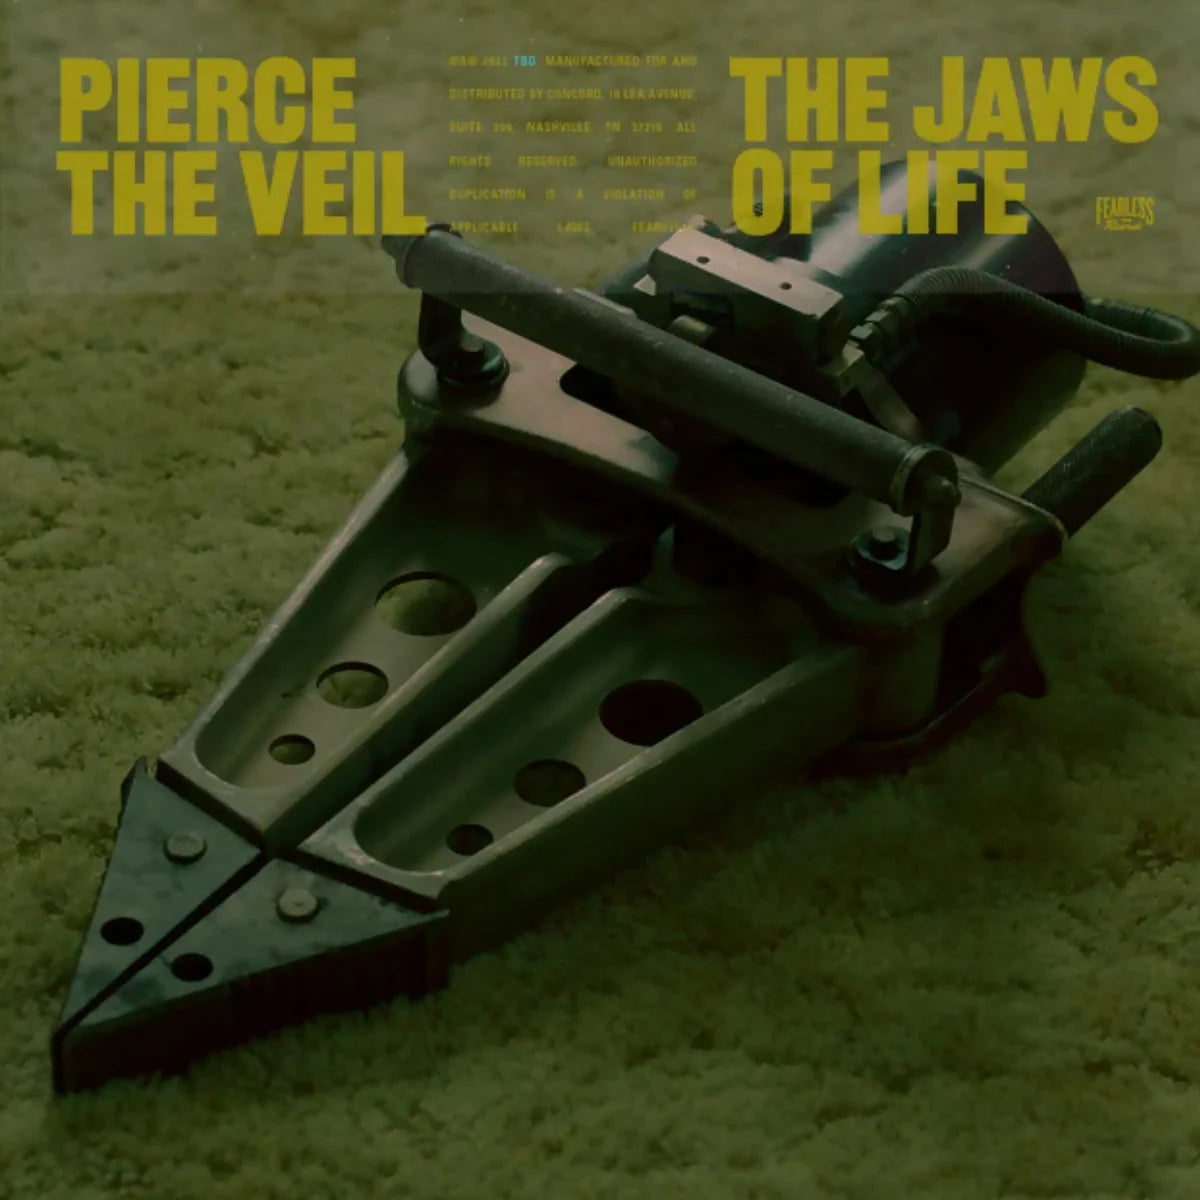 Pierce The Veil - The Jaws Of Life